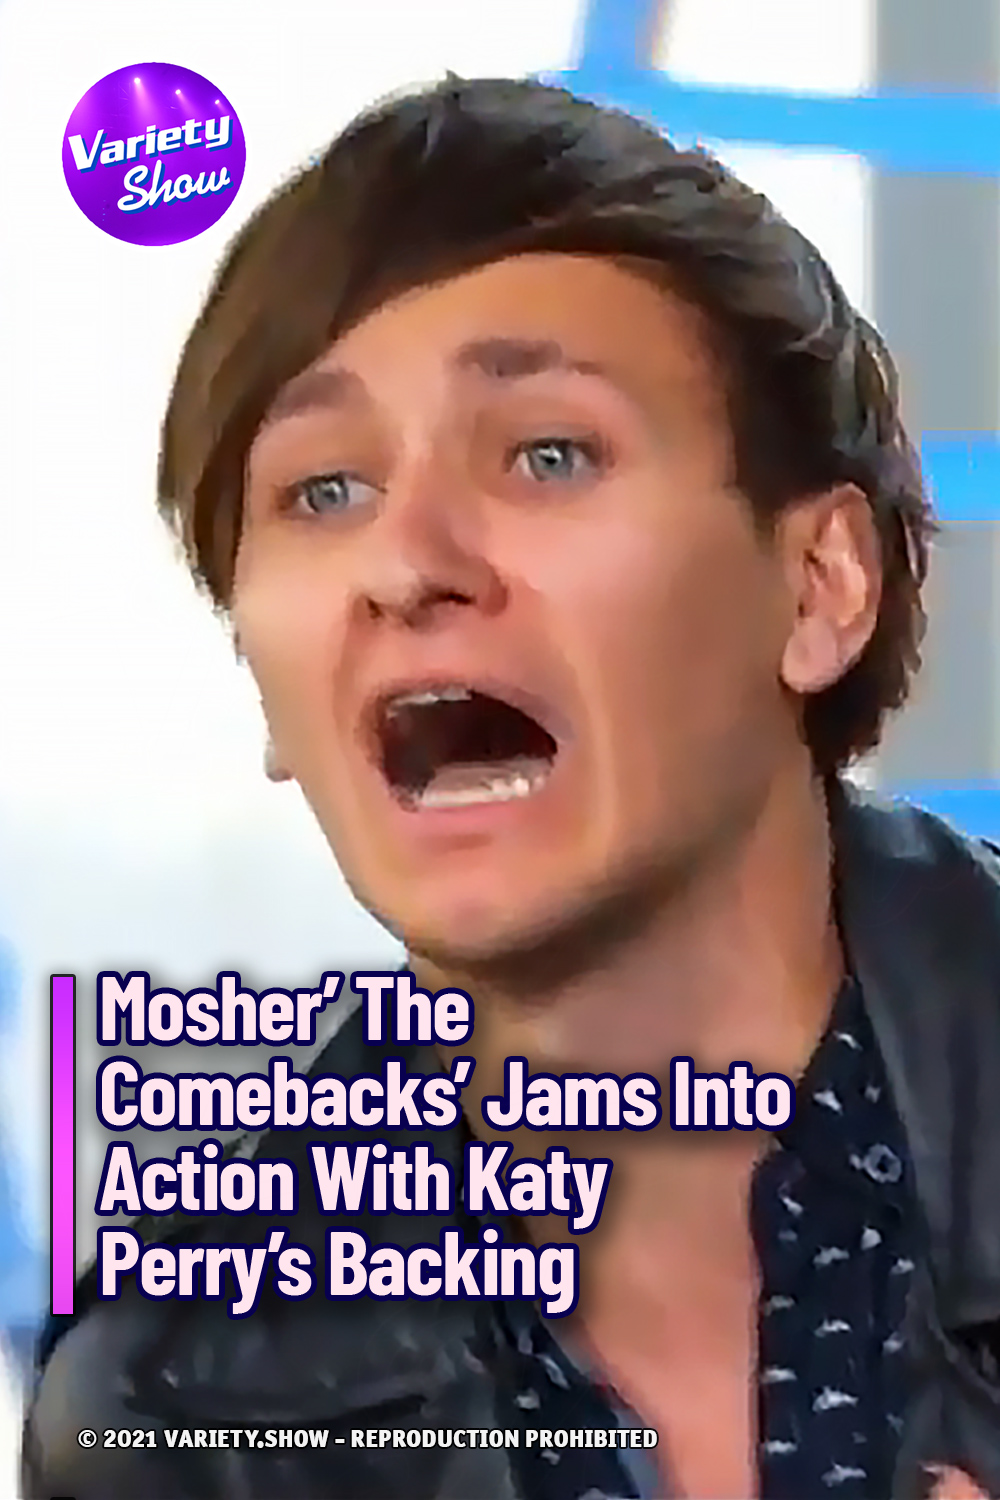 Mosher\' The Comebacks\' Jams Into Action With Katy Perry\'s Backing